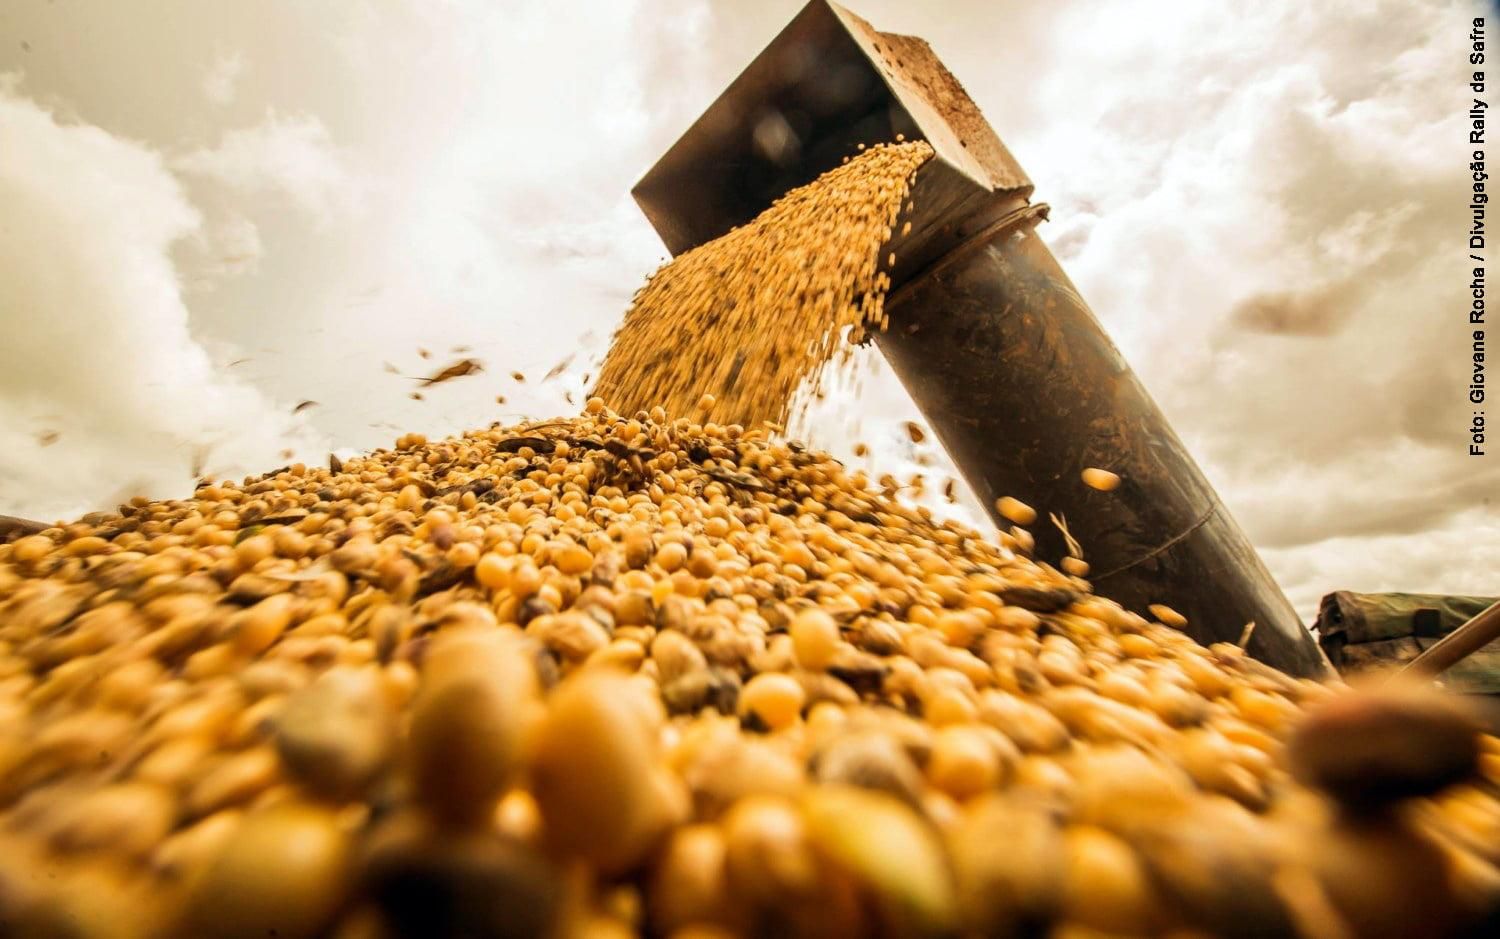 Brazil traders commission tool to gauge farmers' soy contract compliance